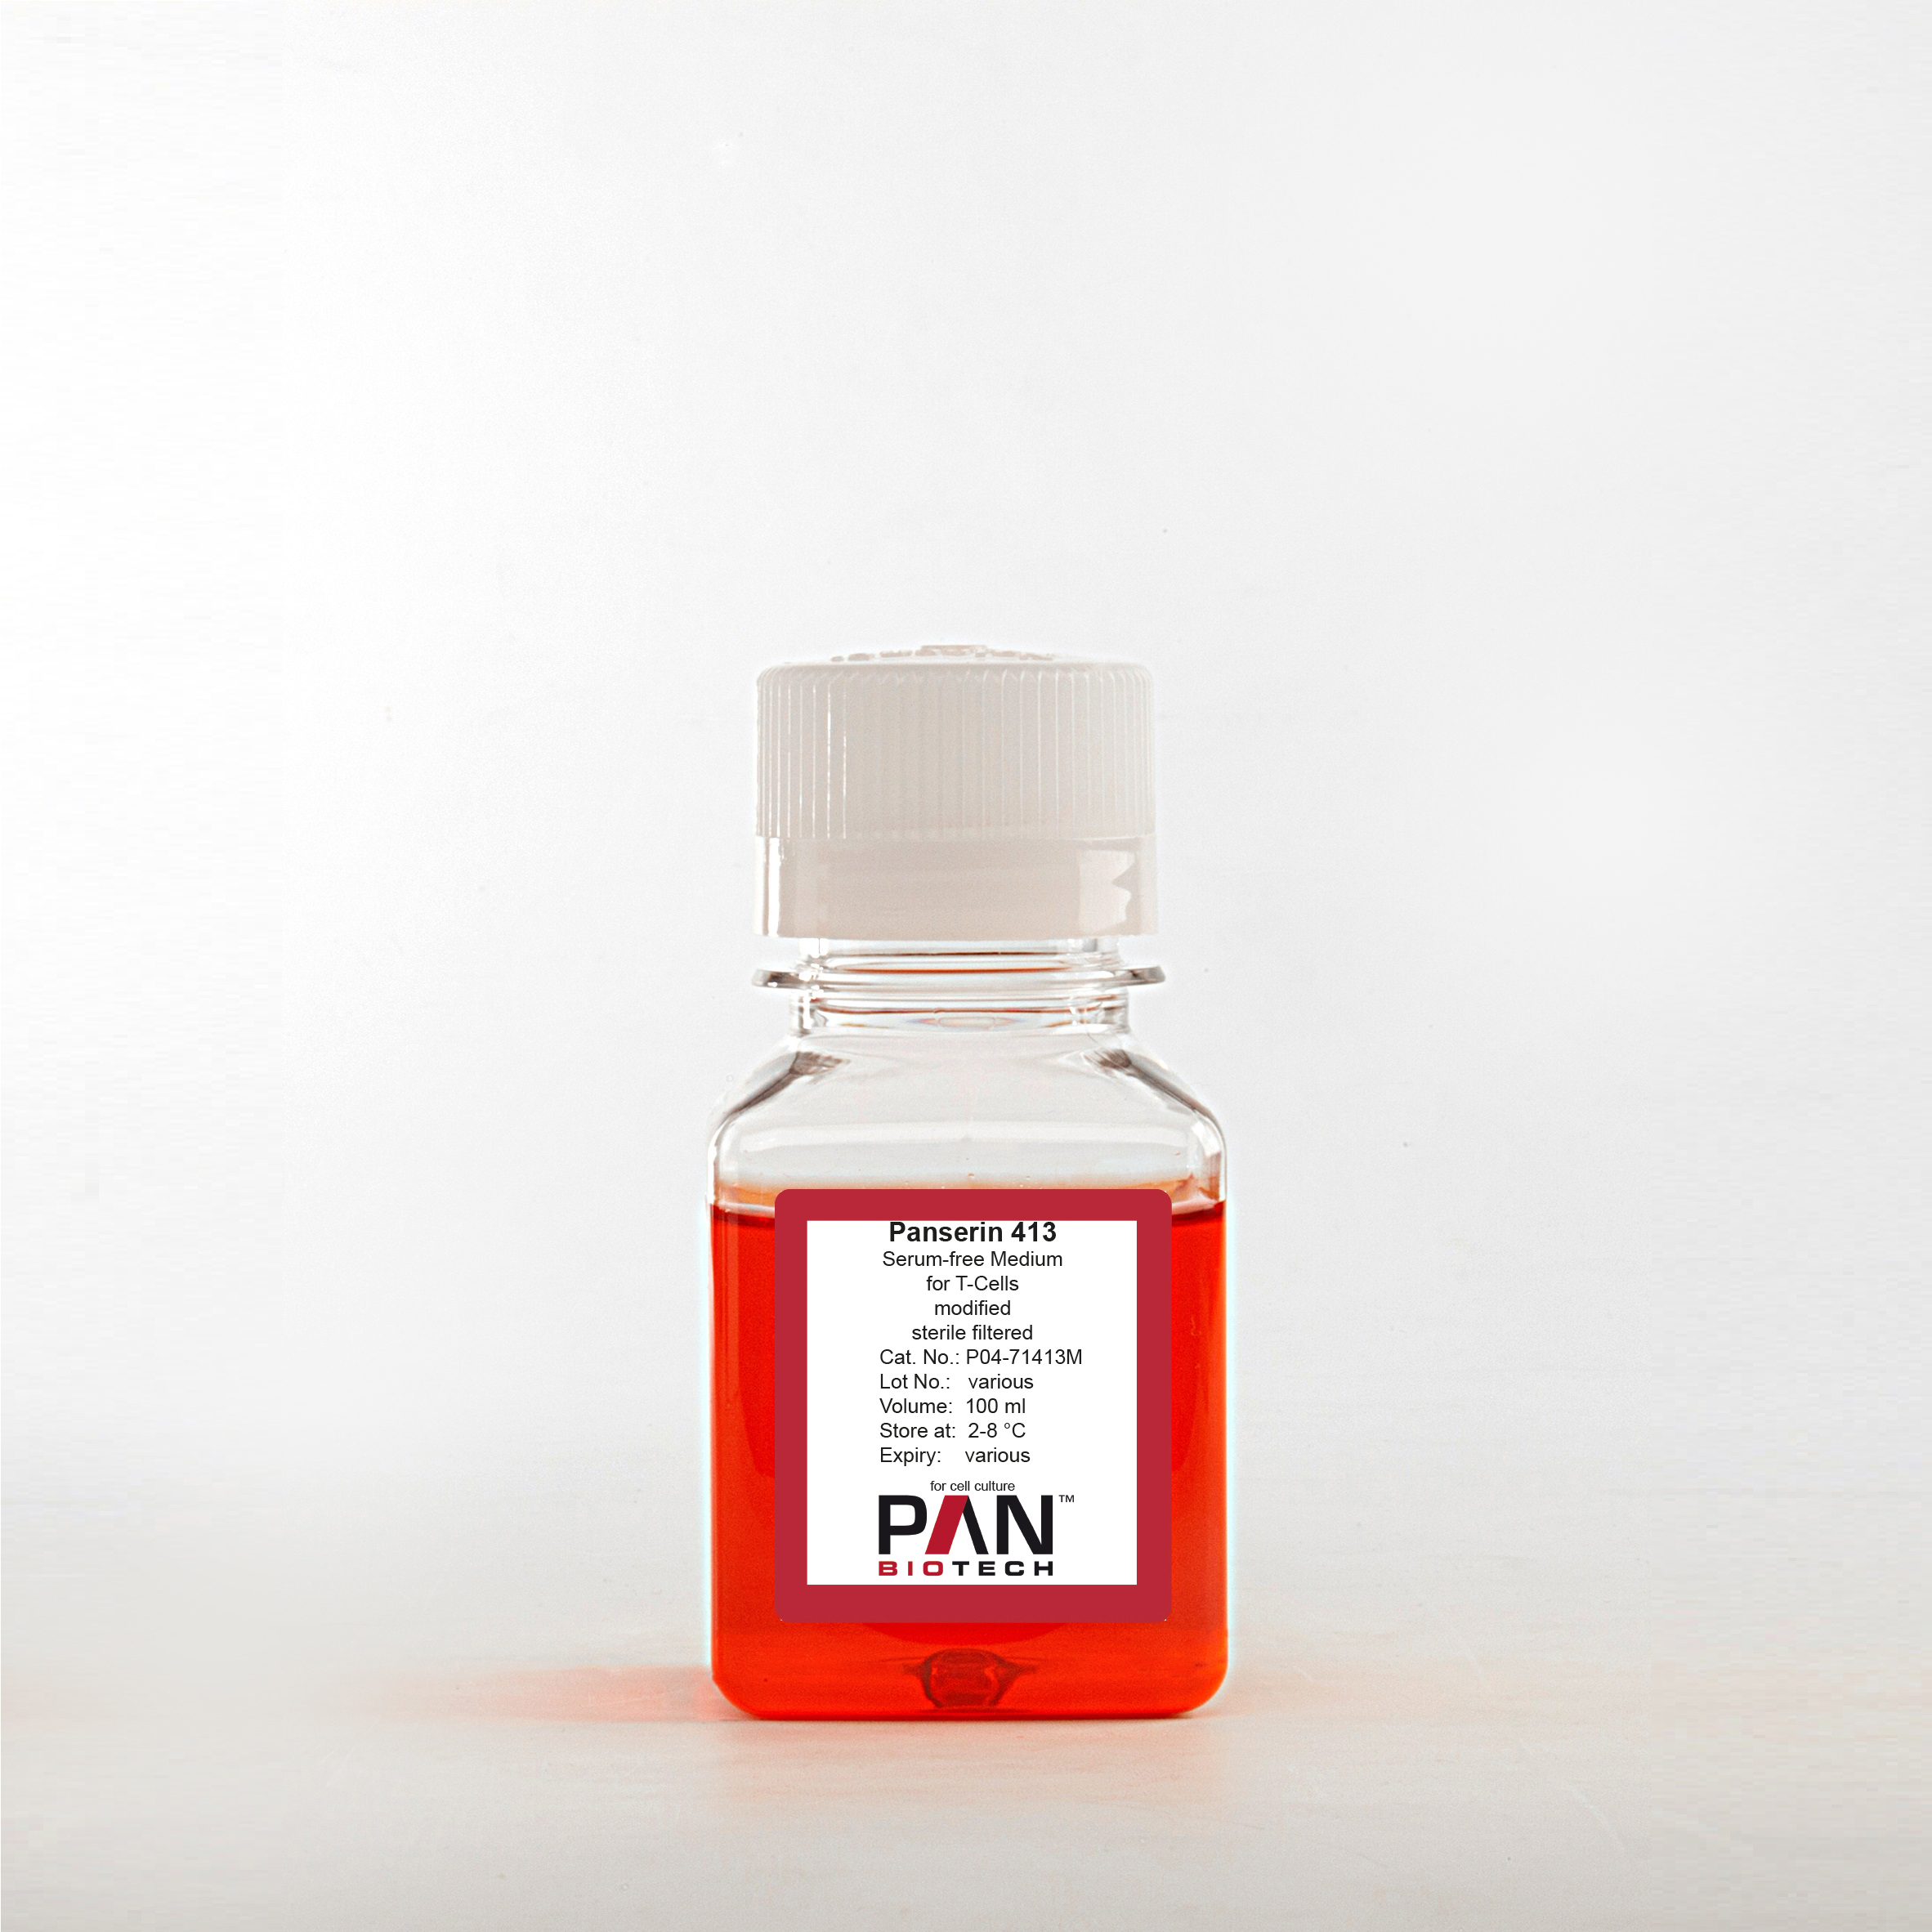 Panserin 413, Serum-free Medium for Lymphocytes, T-Cells and Hybridoma Cells, w: L-Glutamine, modified